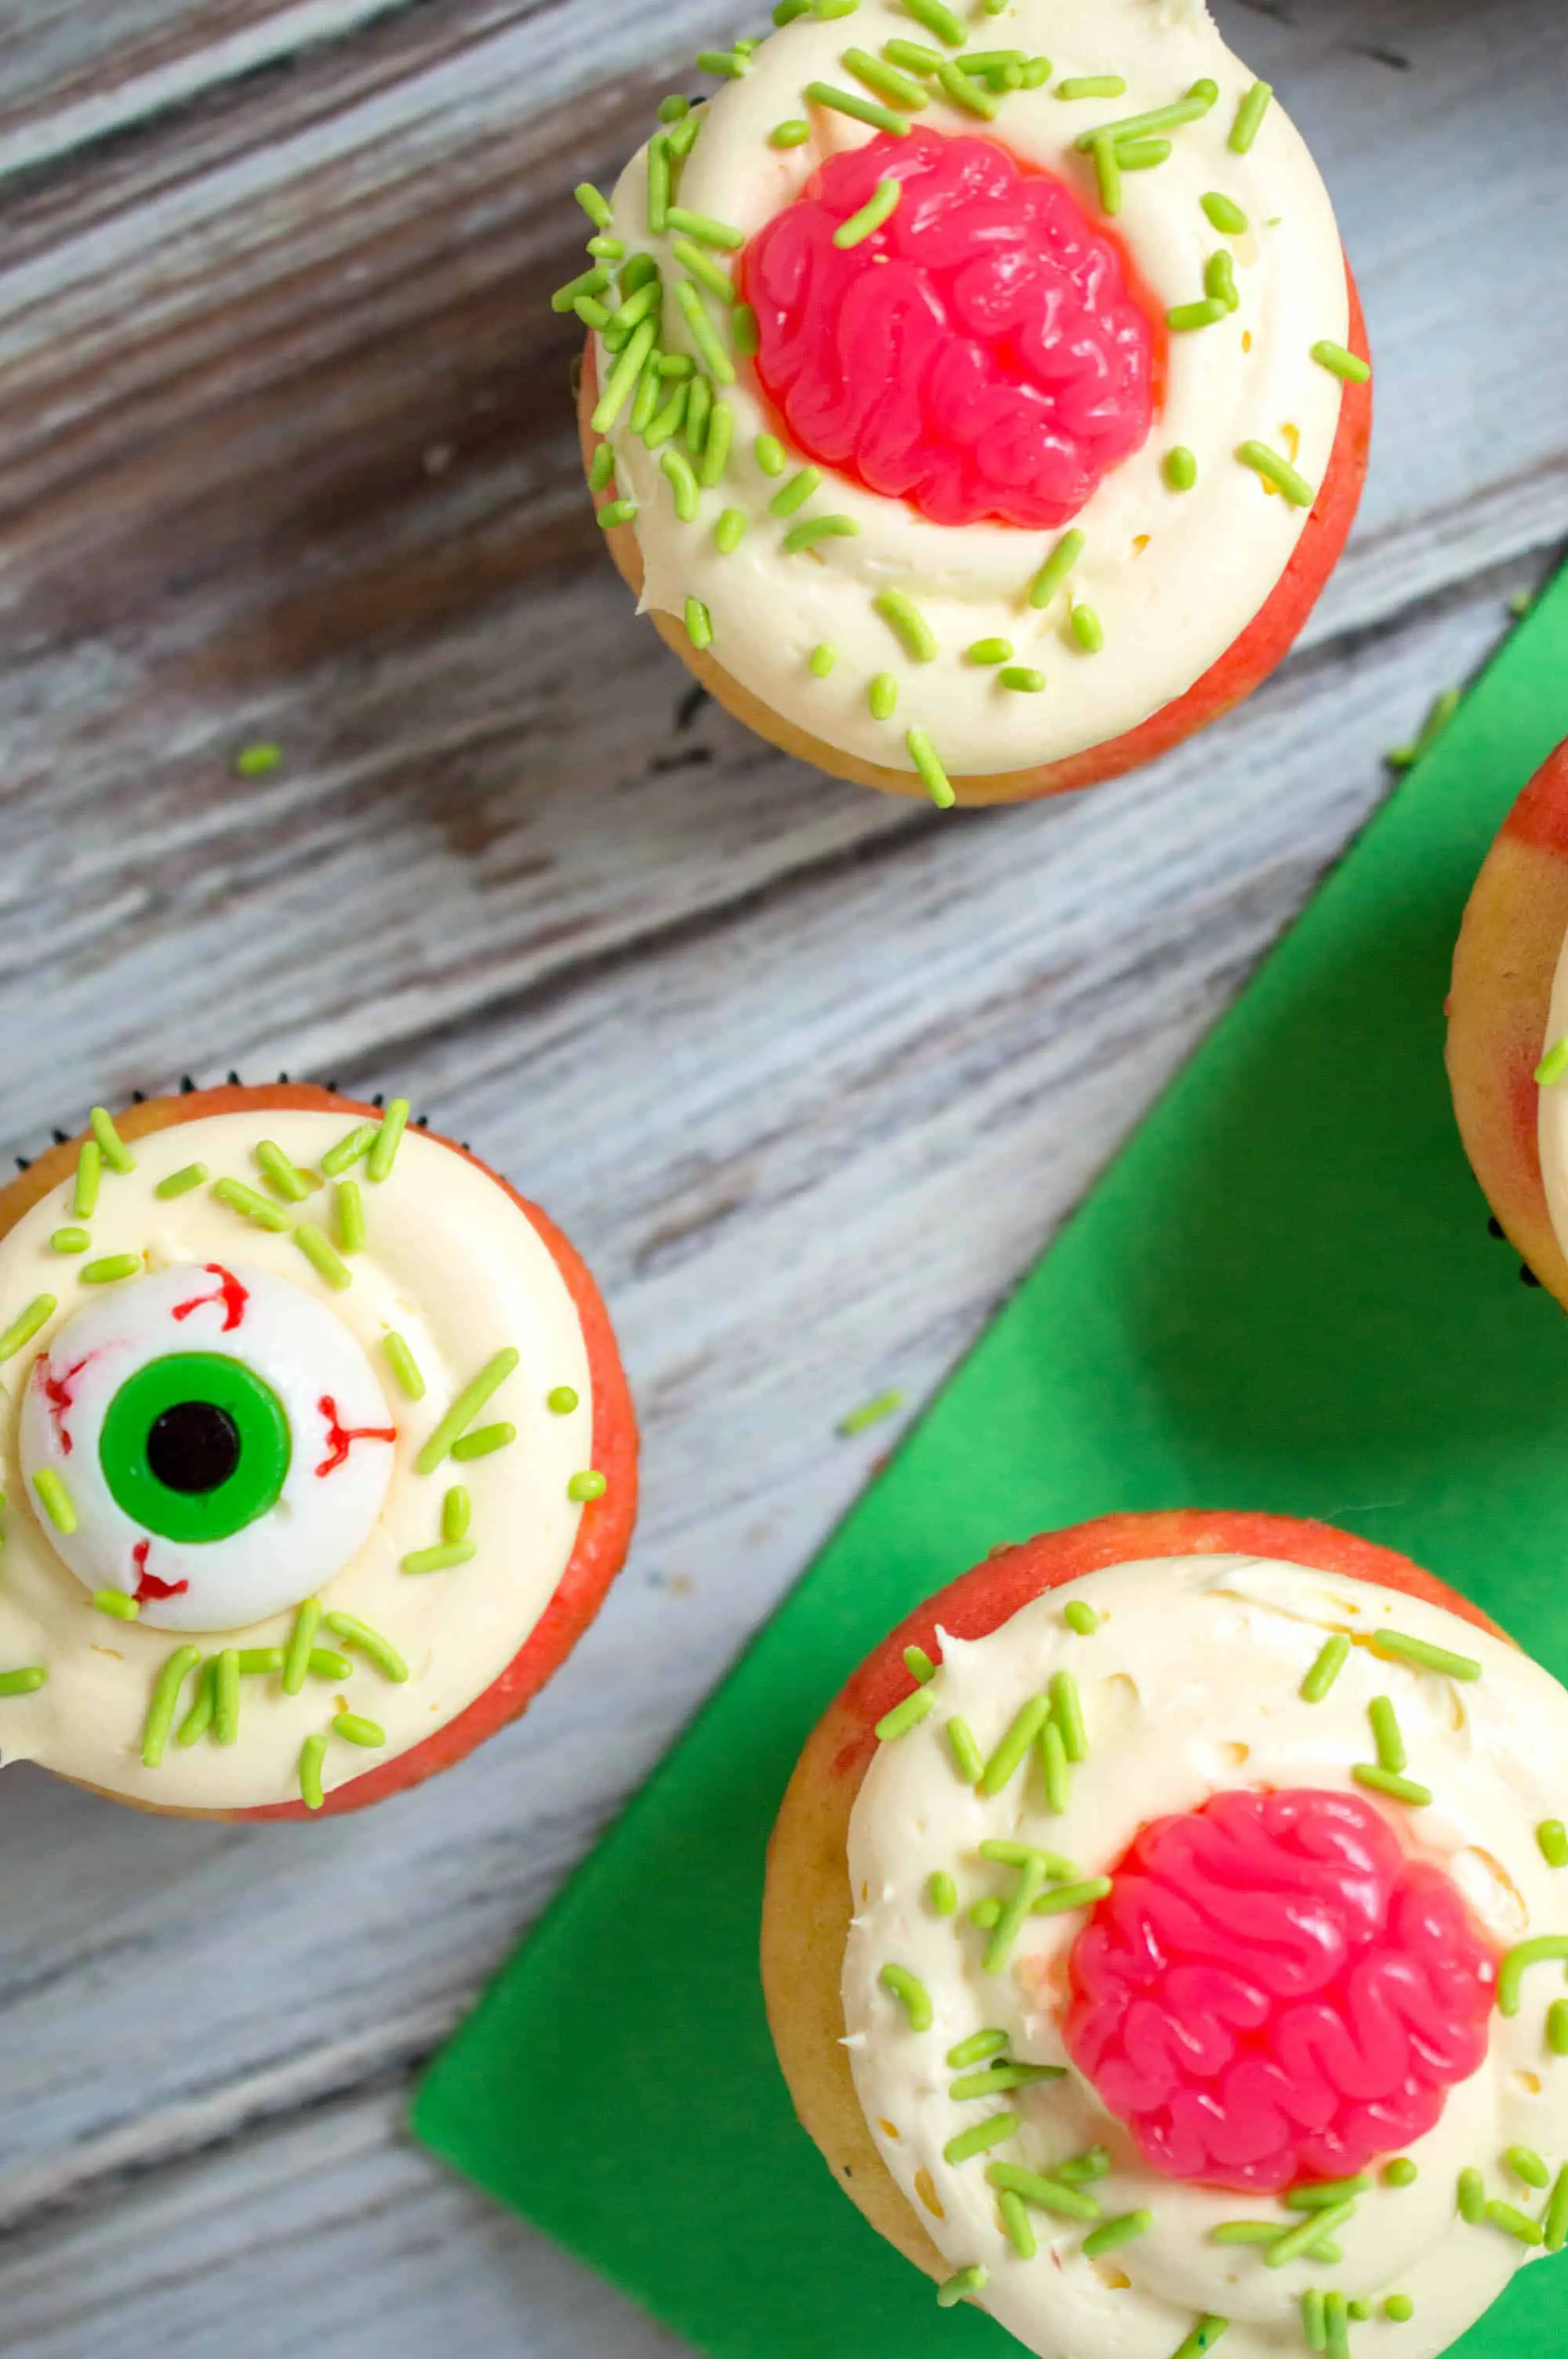 Zombie Cupcakes Perfect For The Season Opener Of The Walking Dead